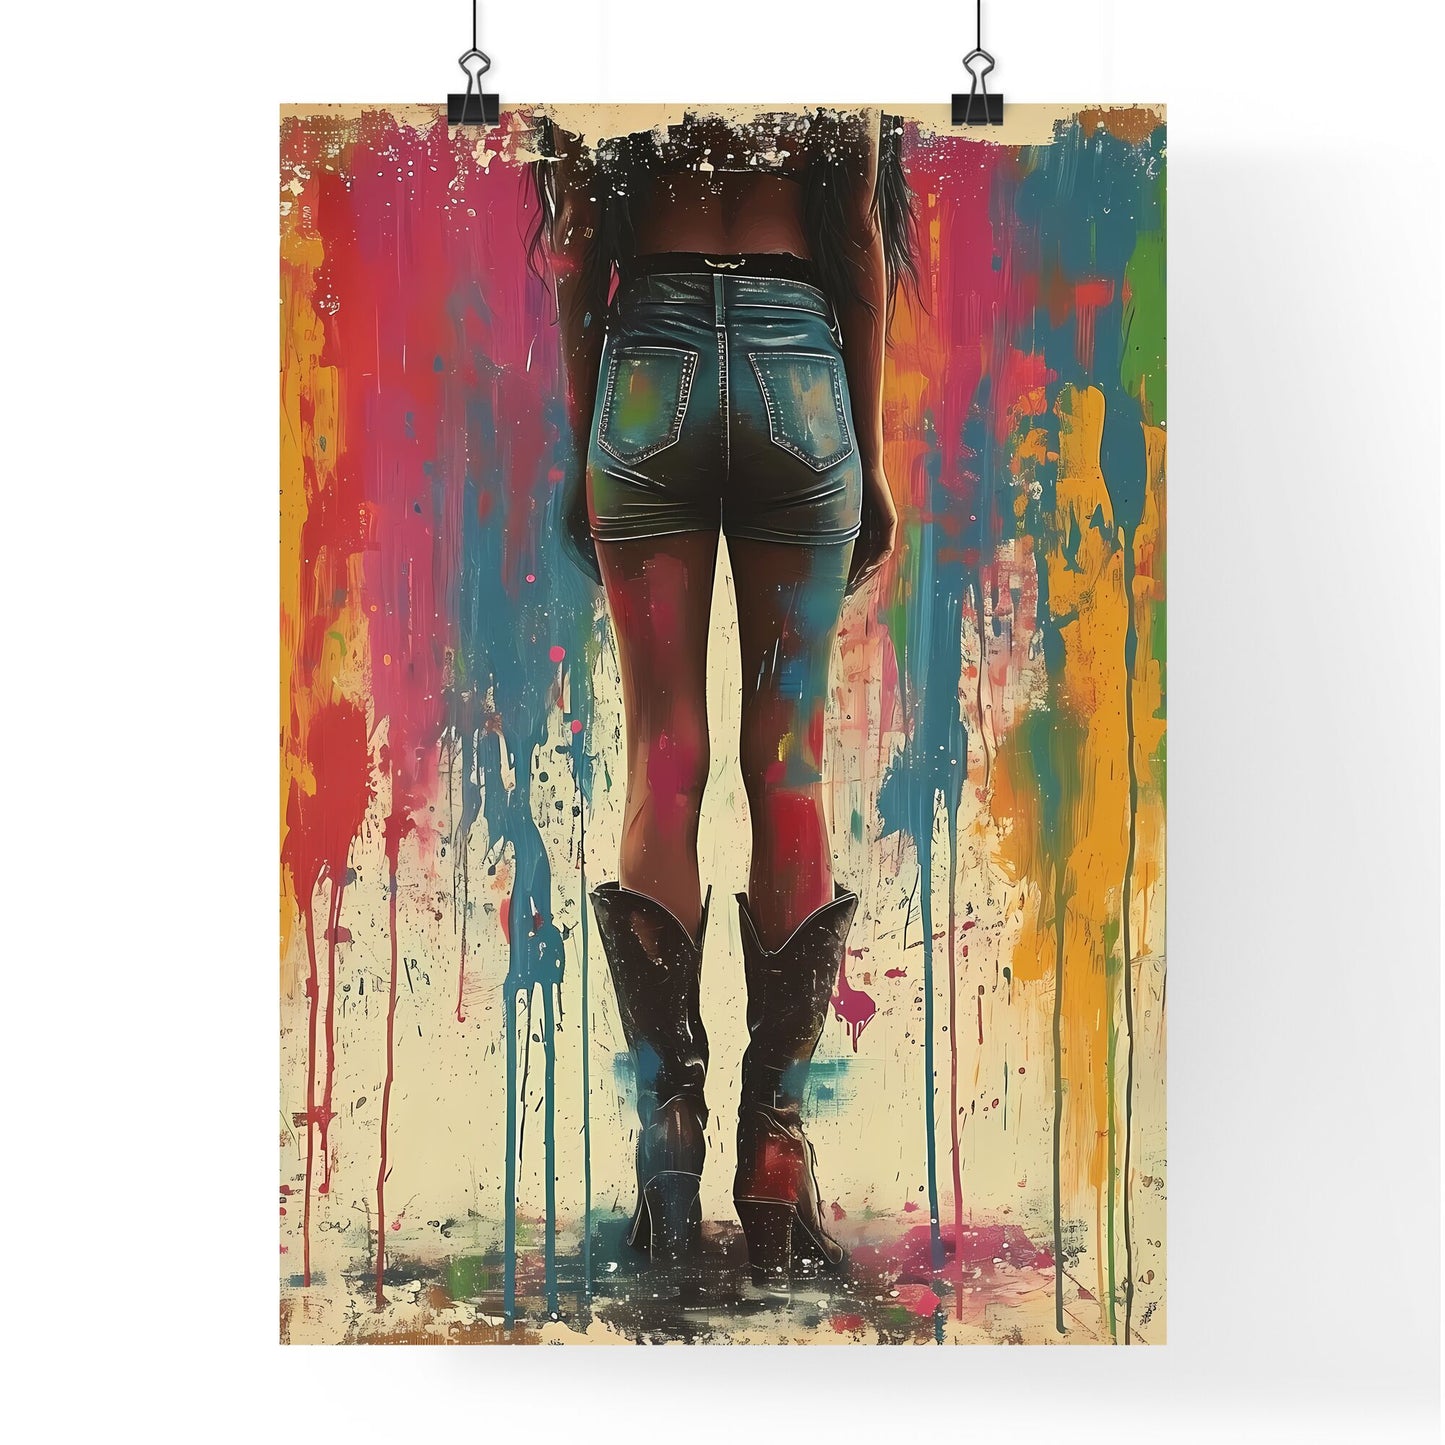 Cowgirl woman beautiful shorts, boots - Art print of a woman in shorts and boots Default Title